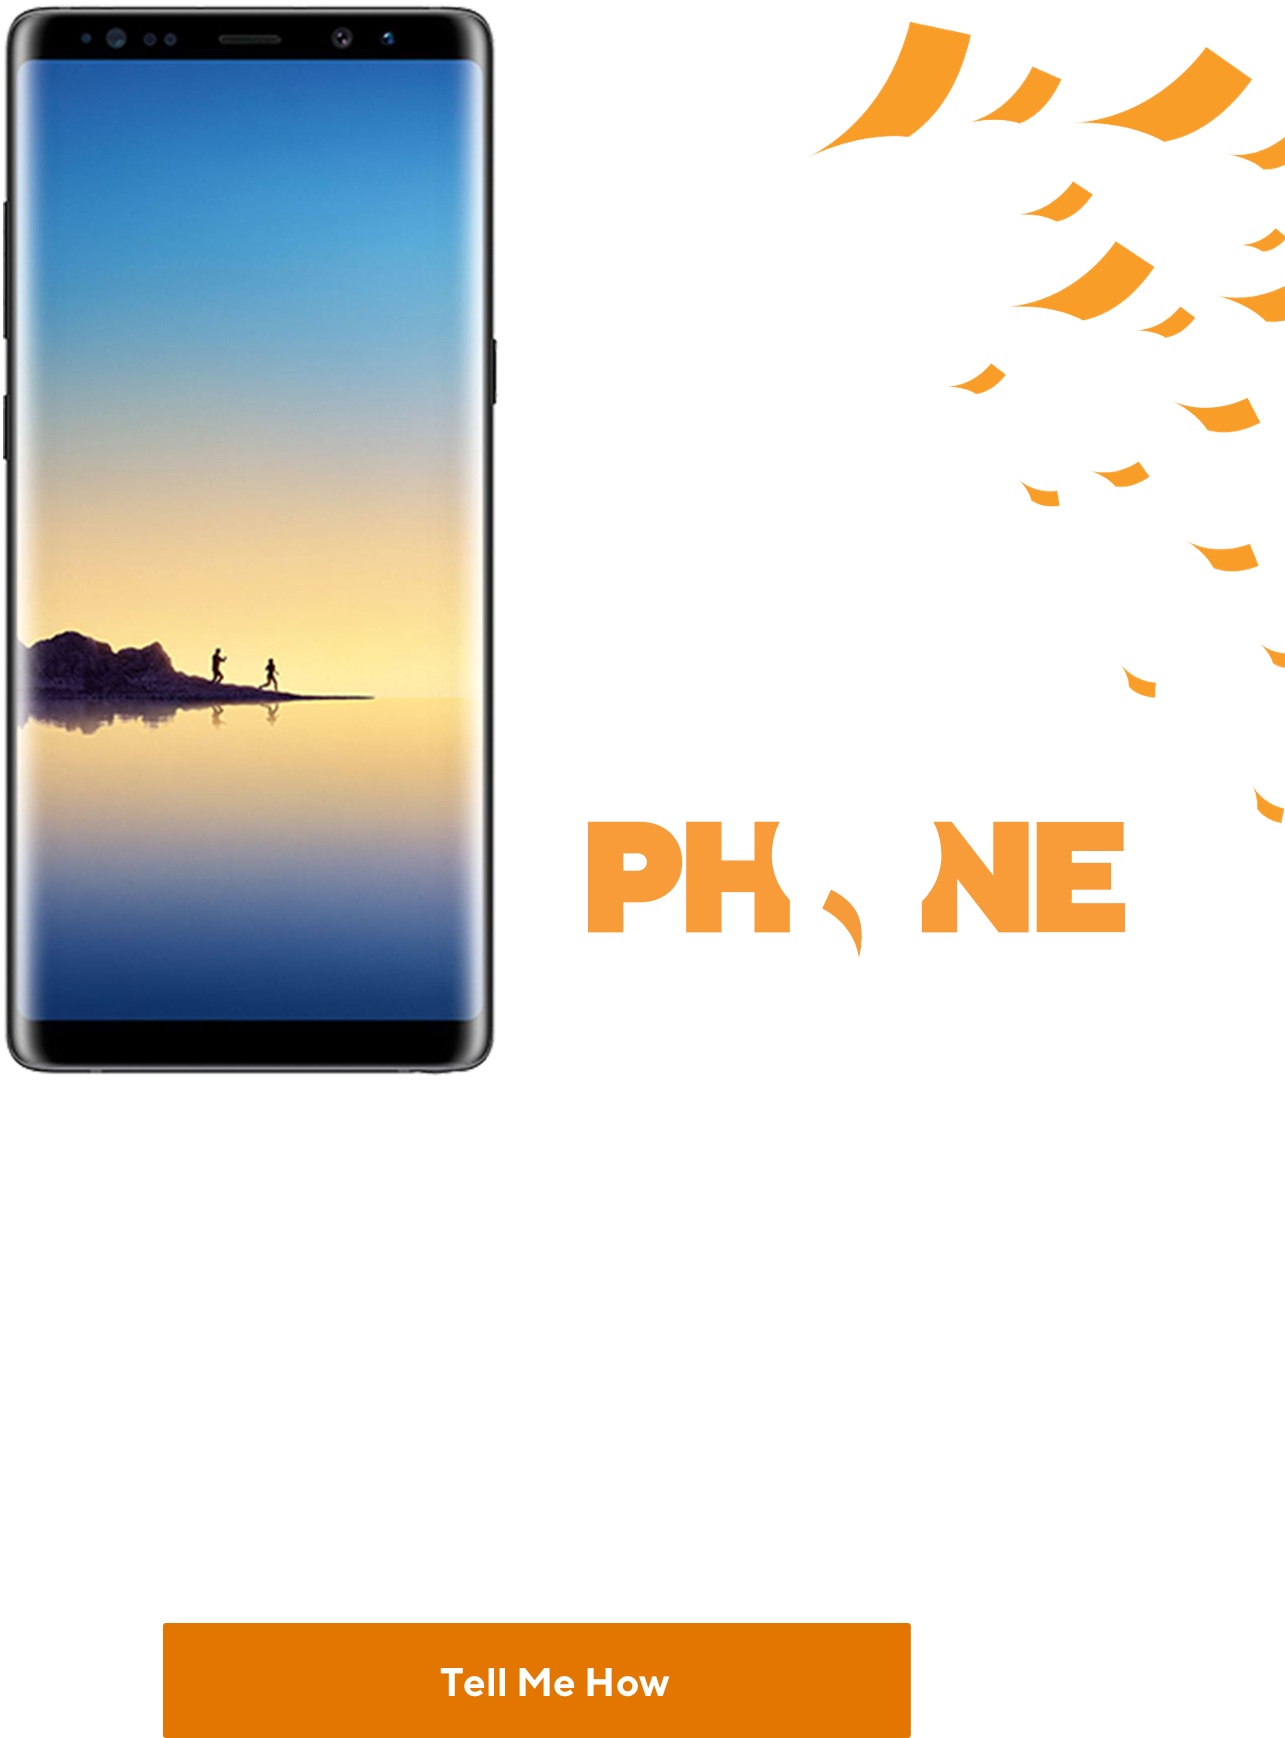 Or bring the phone you already love. You already have a phone you can't live without? Great! Keep your phone, keep your number, and lose the contract.